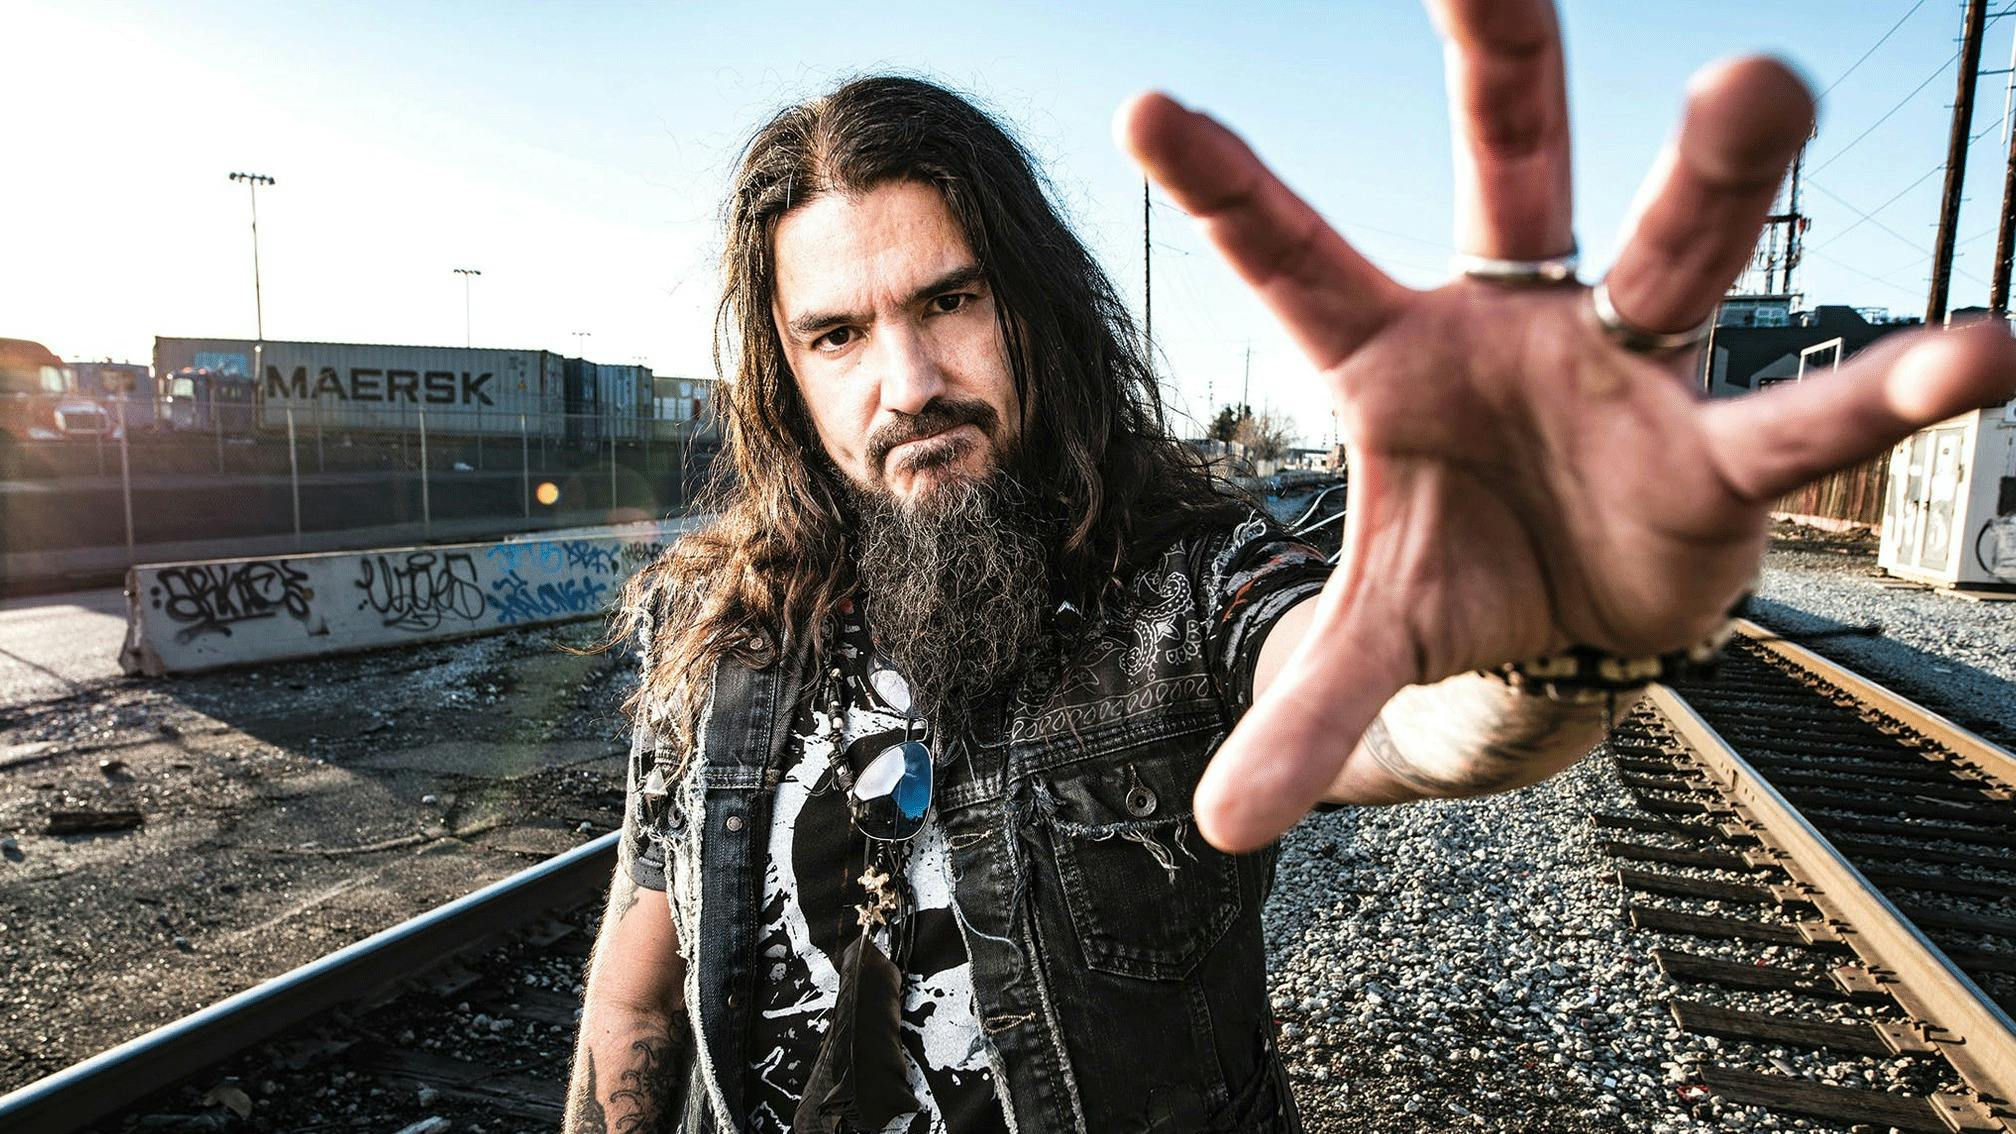 Bad pillows, rap festivals and a ‘sh*t-shelf’: Life on the road with Robb Flynn